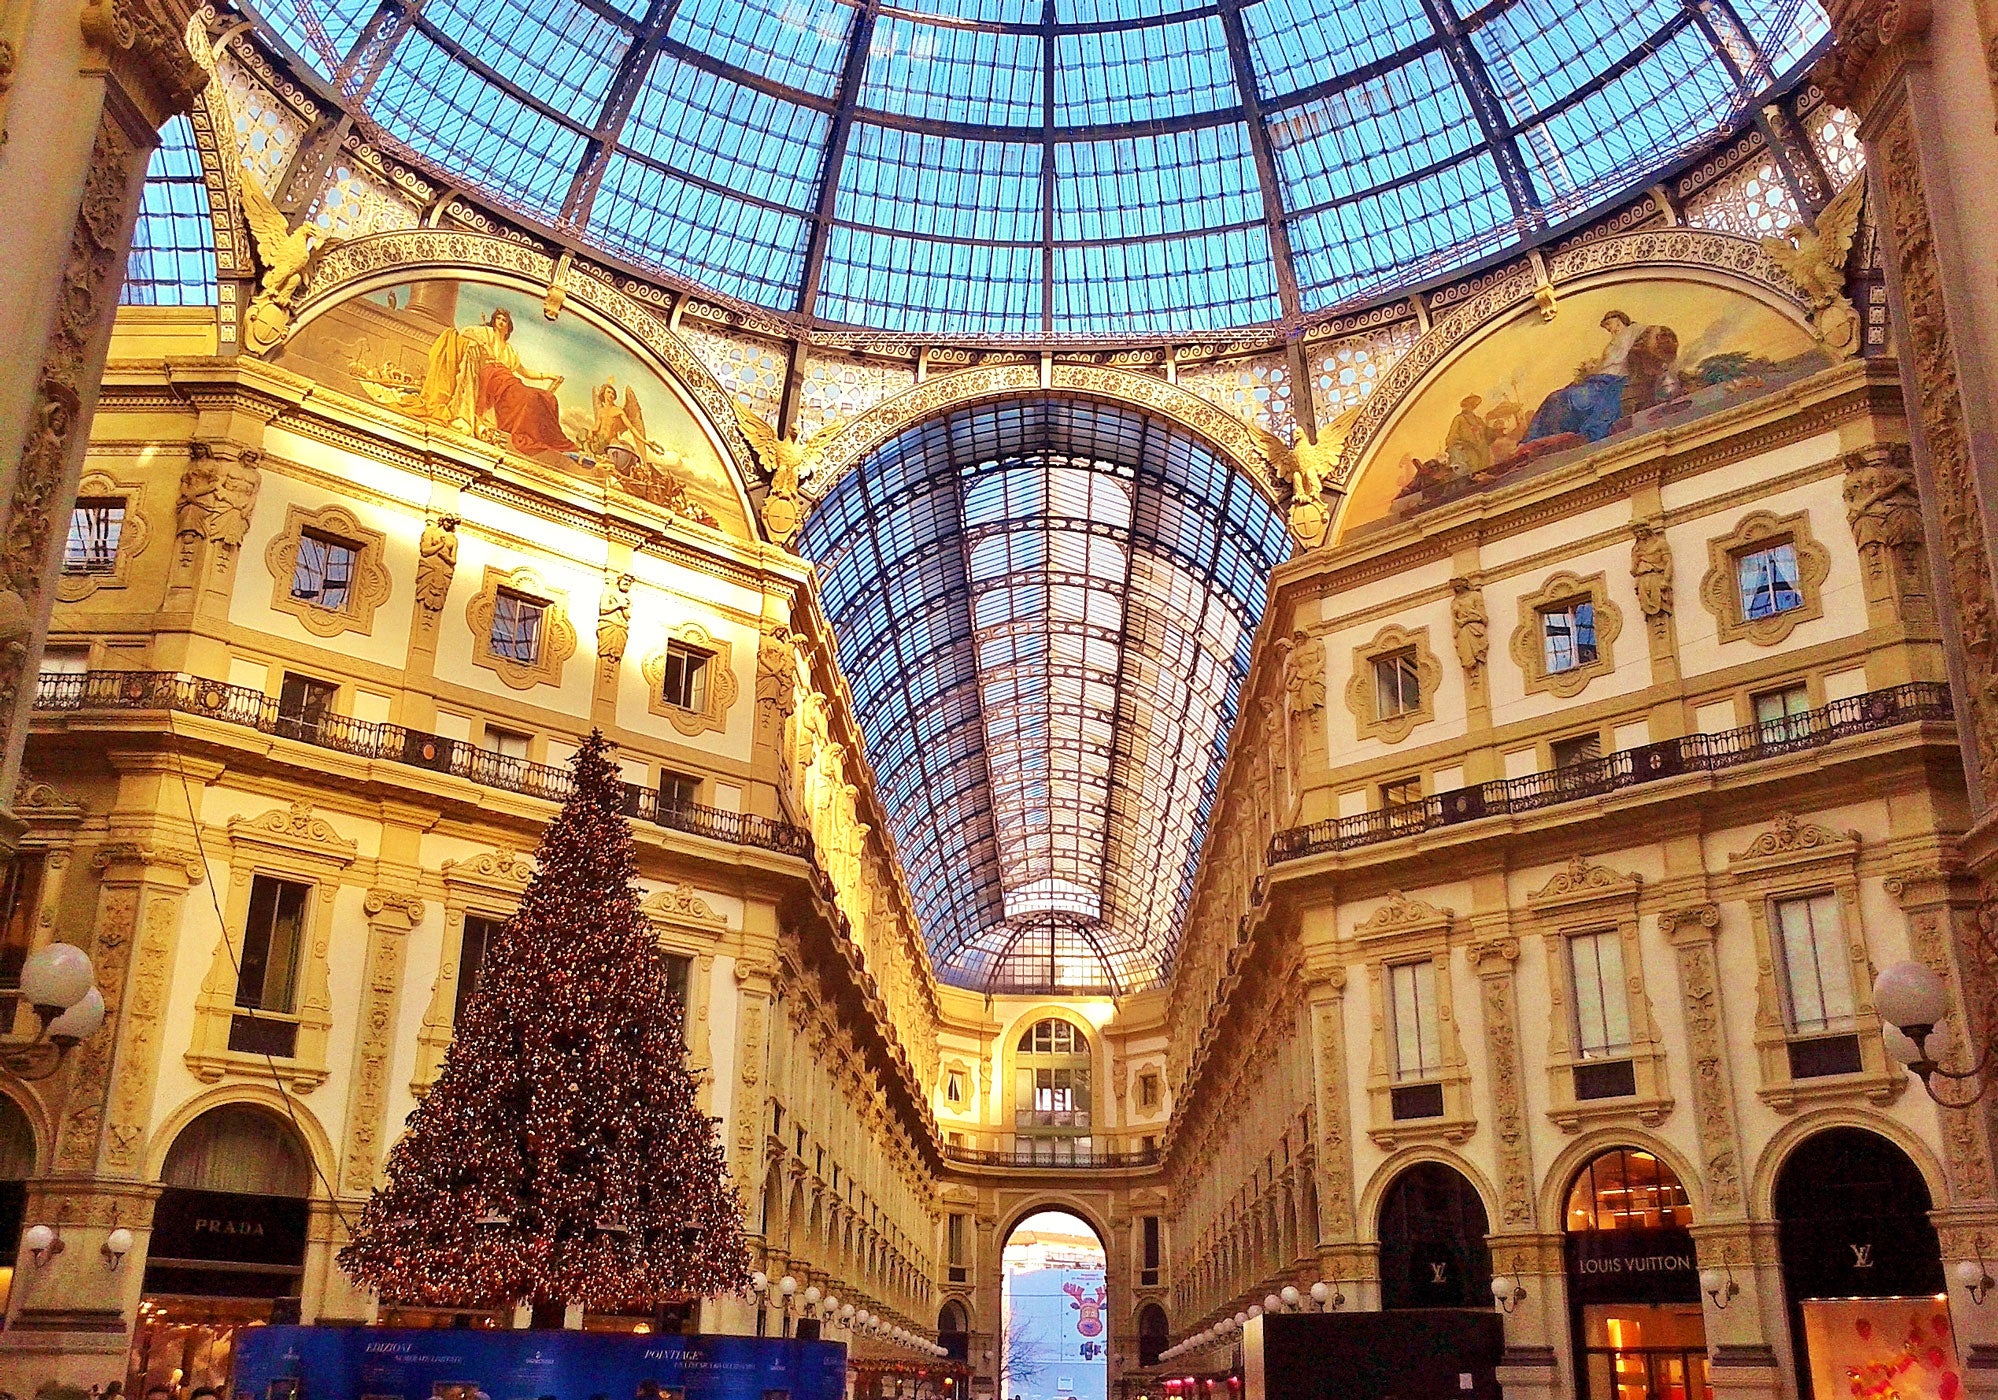 Christmas in Italy